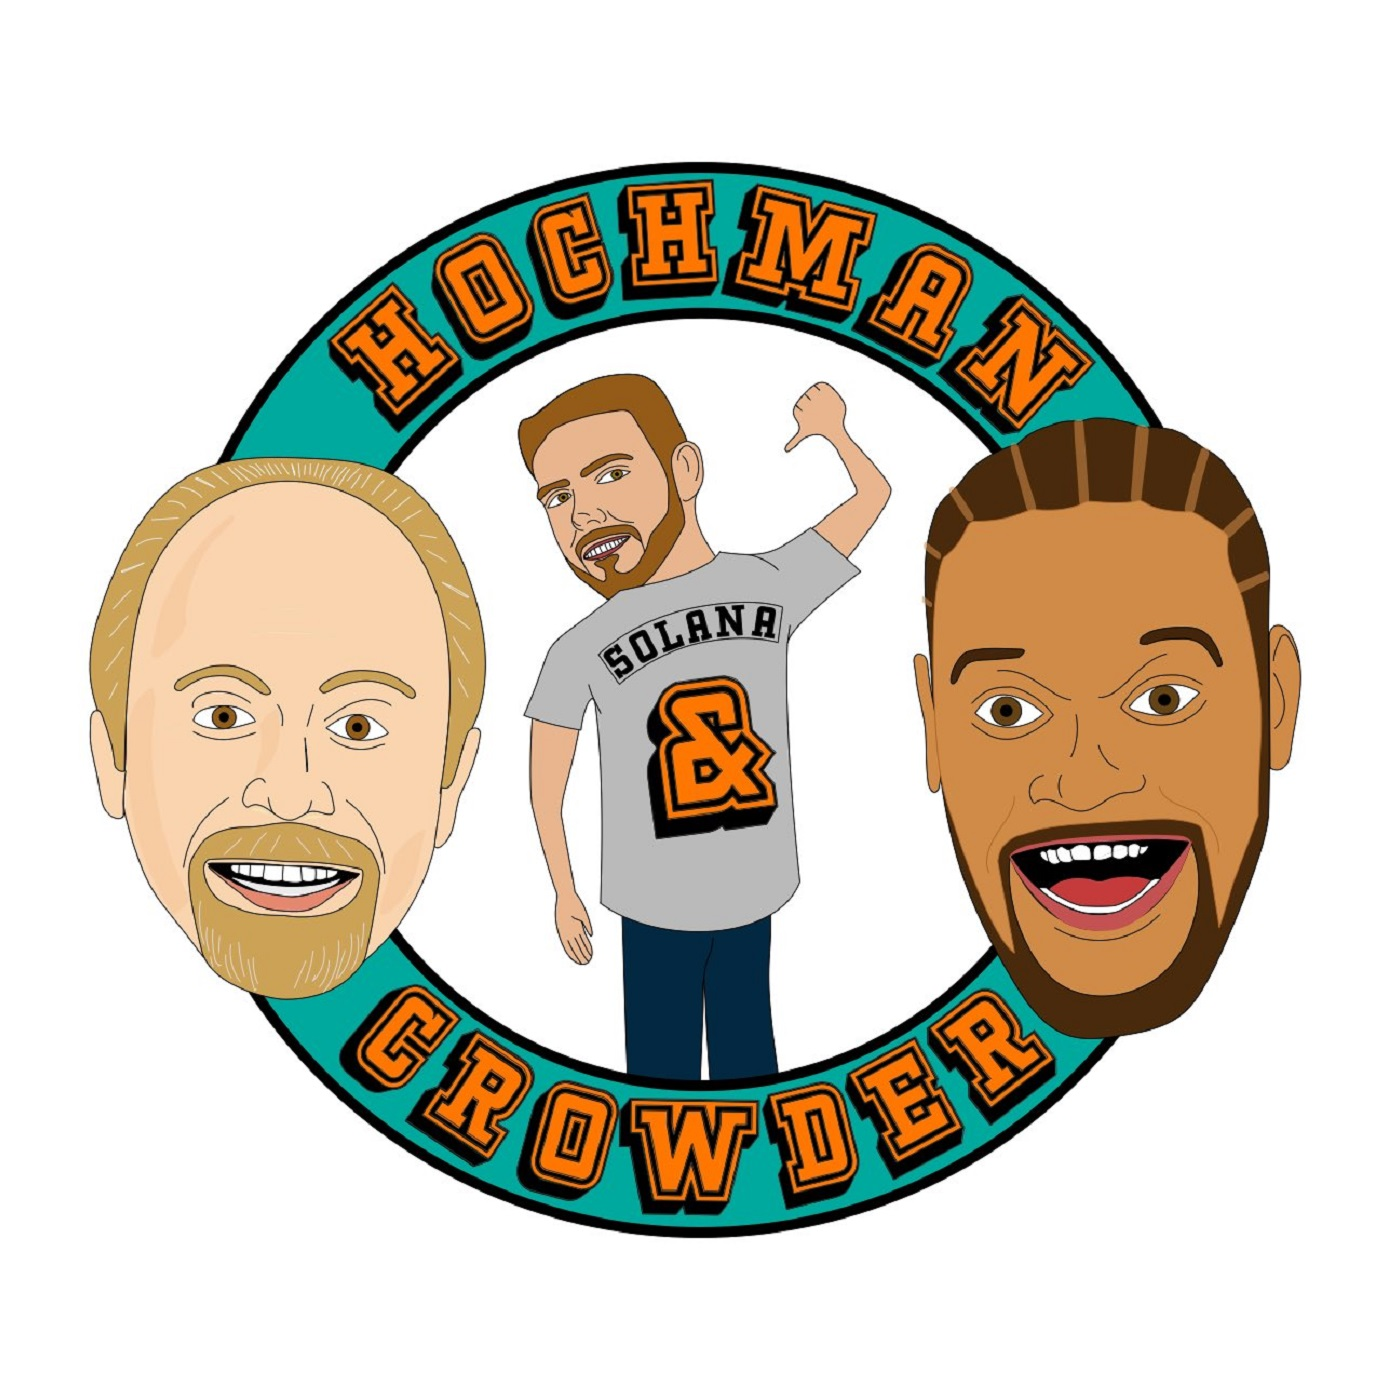 05-30-2019 - Hoch and Crowder Podcast Hour 4